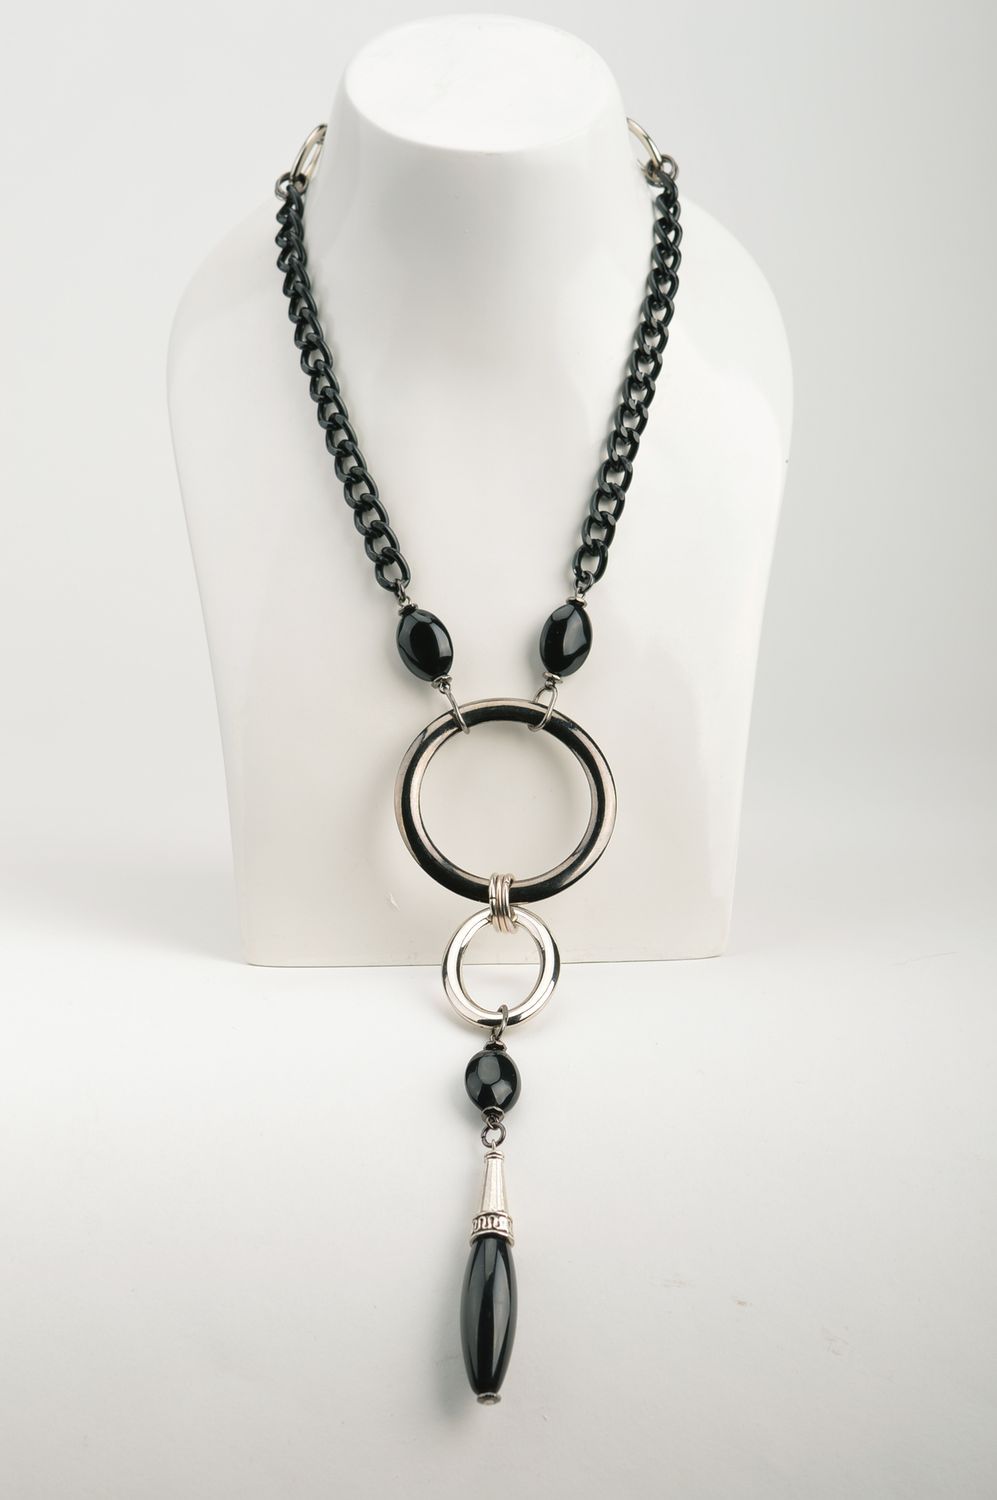 Unusual handmade black and silver colored metal necklace with beads and charm photo 3